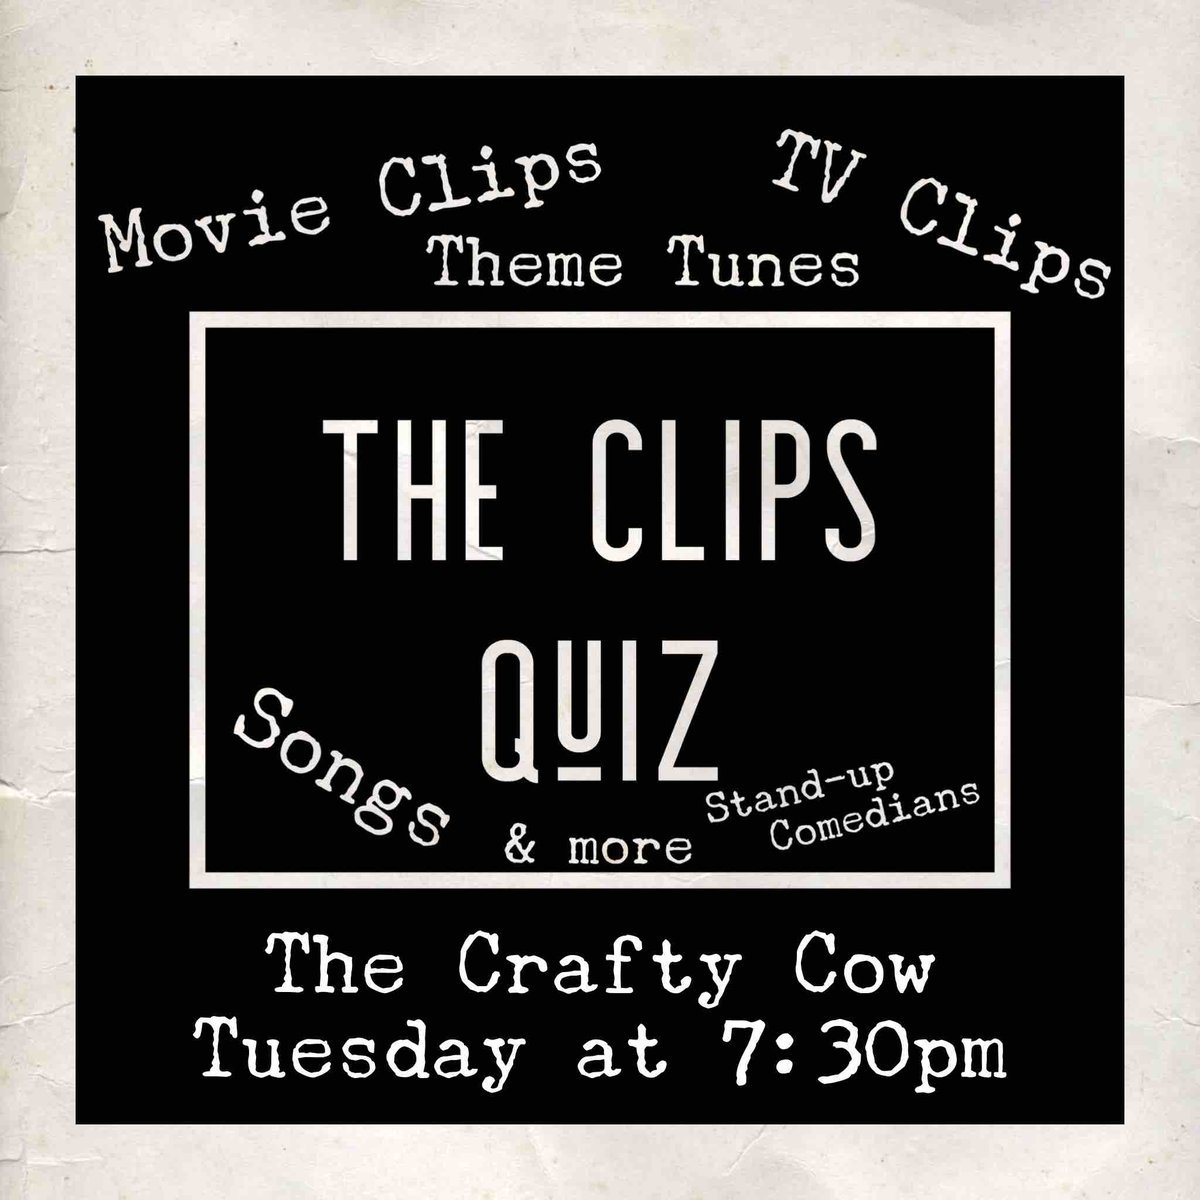 Join us on Tuesday at #TheCraftyCow in #BS7, #Horfield, #Bristol for our next #QuizNight! 7:30pm start for our clips #Quiz with a £50 bar tab and wine to be won